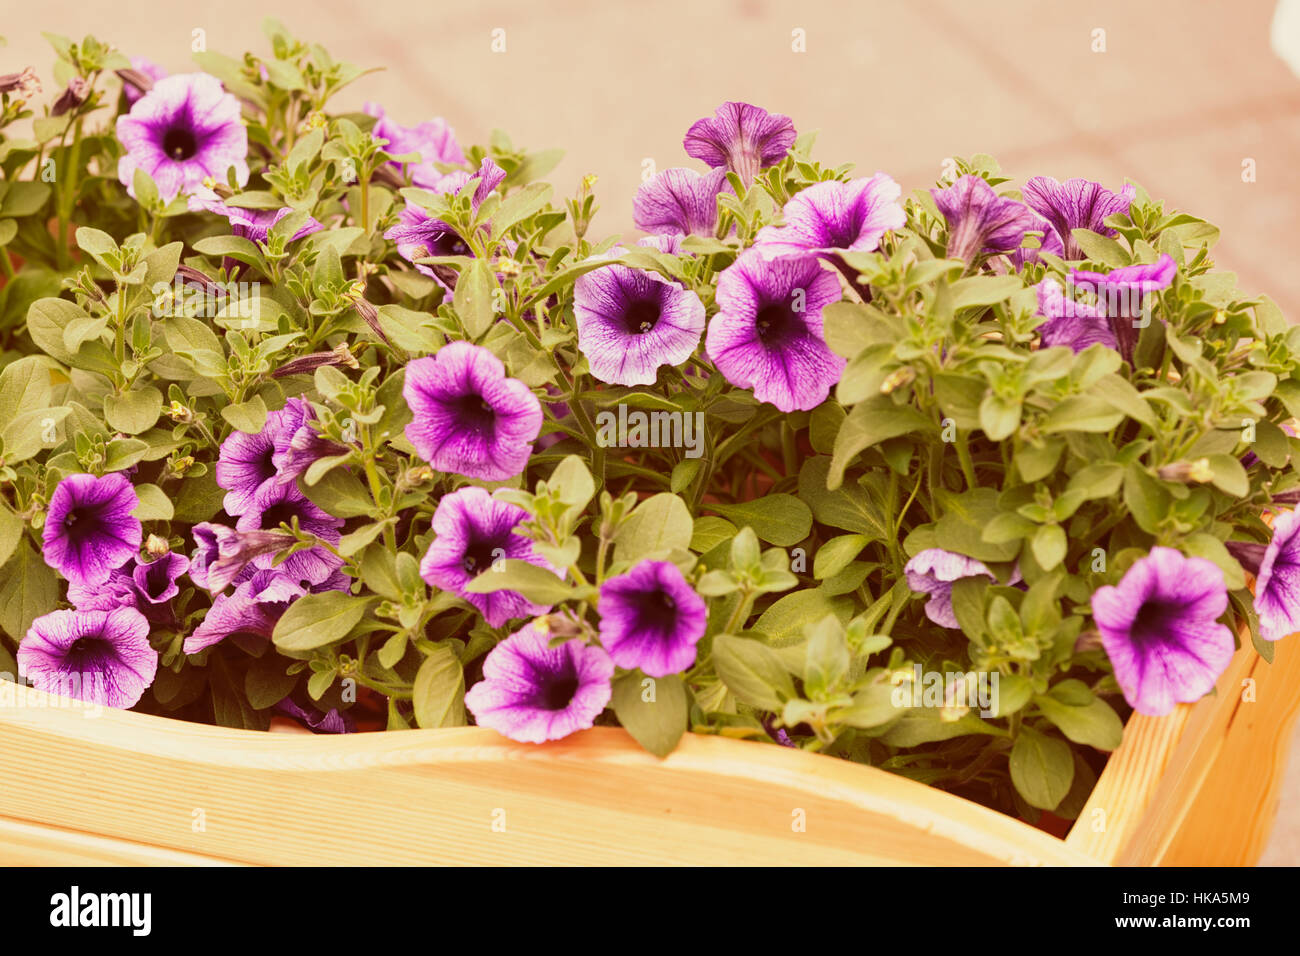 purple flowers  with green leaves, note shallow depth of field Stock Photo